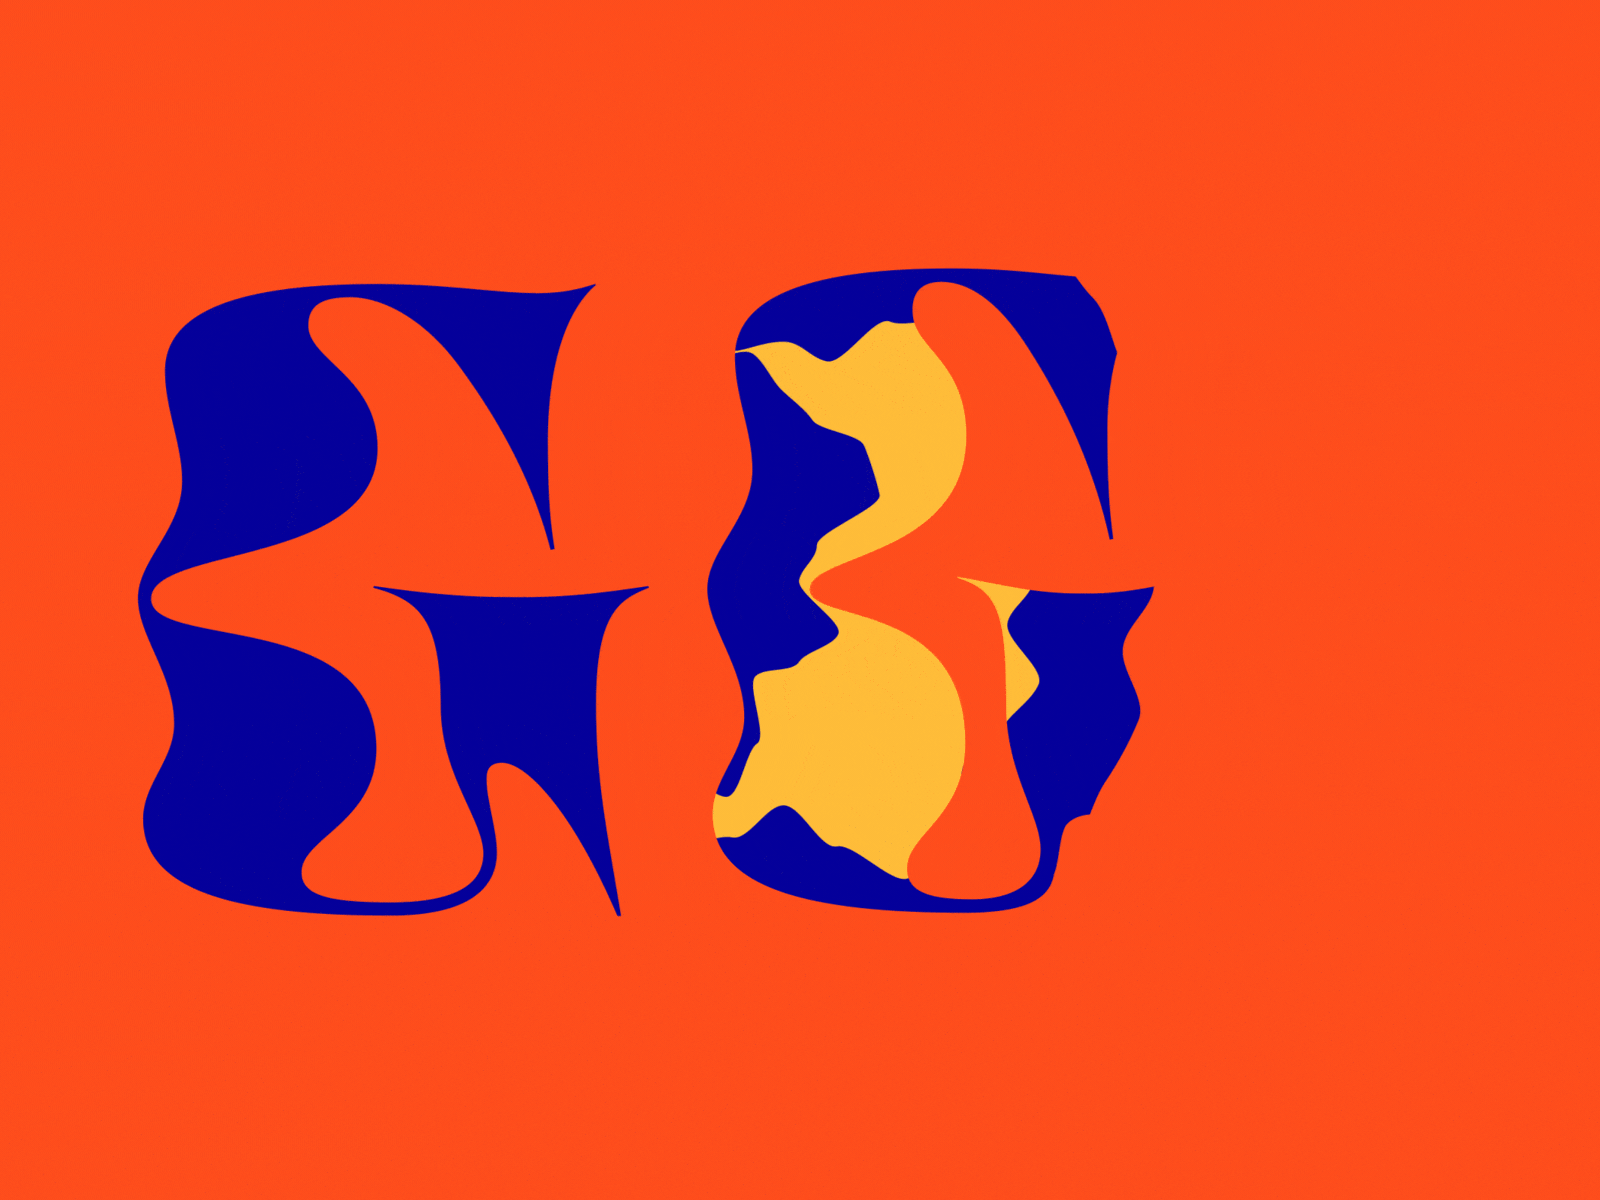 36 Days of Type - G 36 days of type 36daysoftype 36daysoftype08 36dot ae after effects animated type animation animography colors design kinetic kinetic type kinetic typography motion motion design motion graphic motion graphics type typography